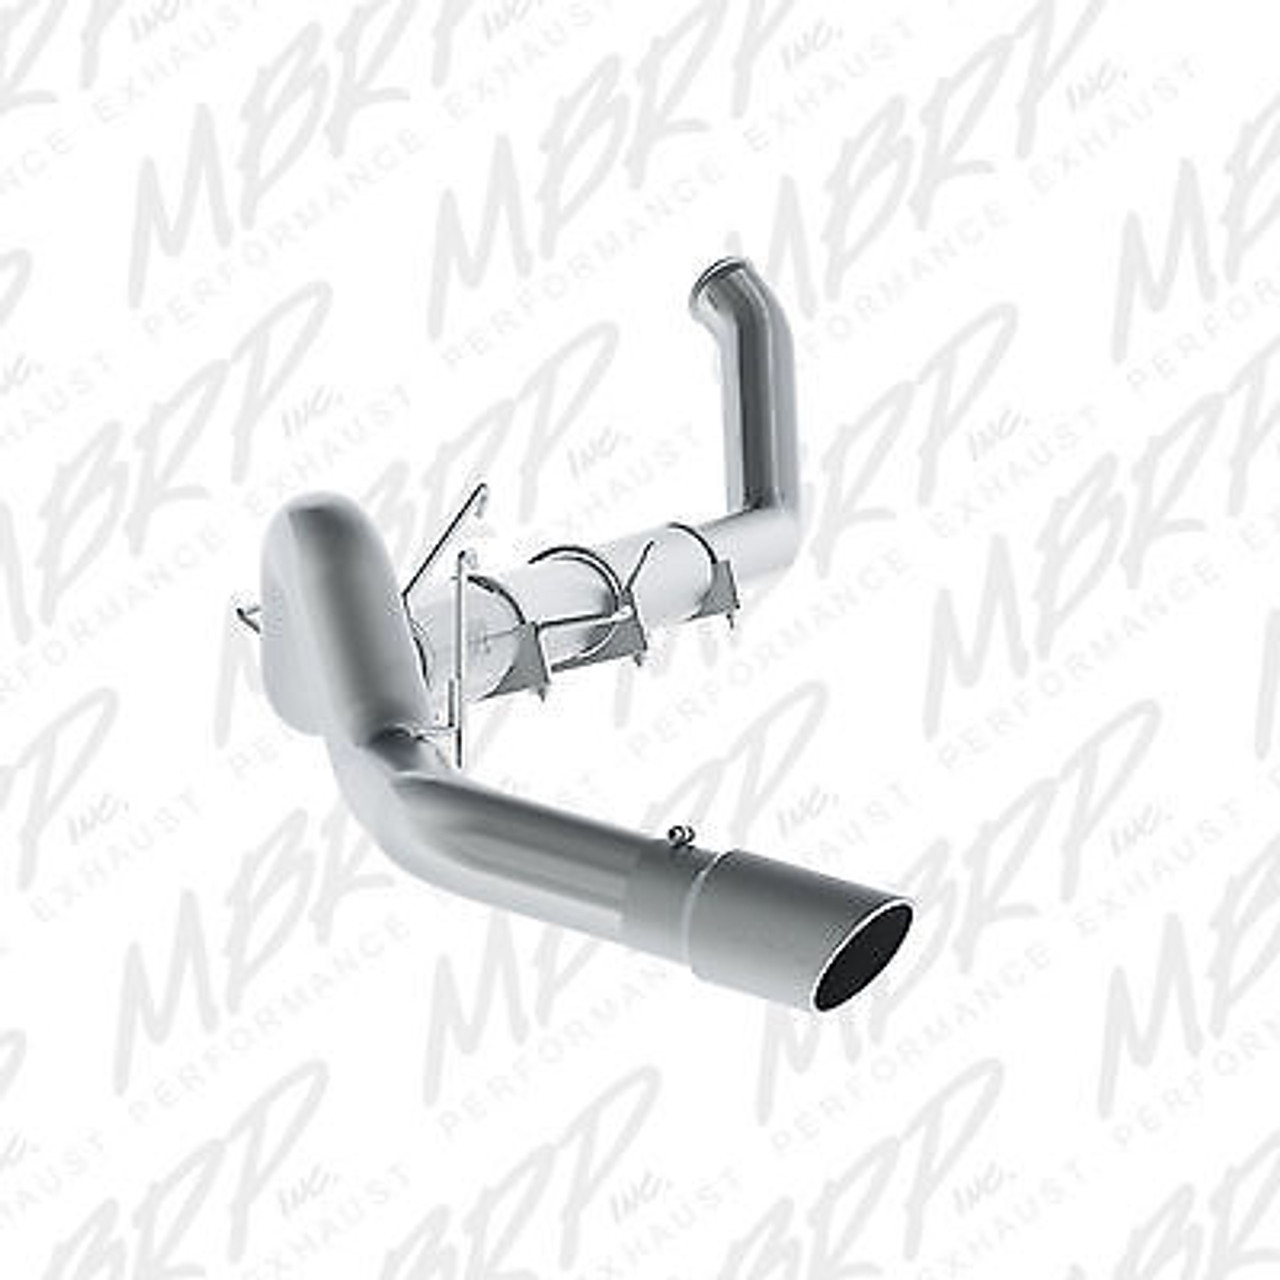 S61120409 - MBRP 5" TURBO BACK STAINLESS EXHAUST WITH TIP FOR 94-02 DODGE RAM CUMMINS DIESEL